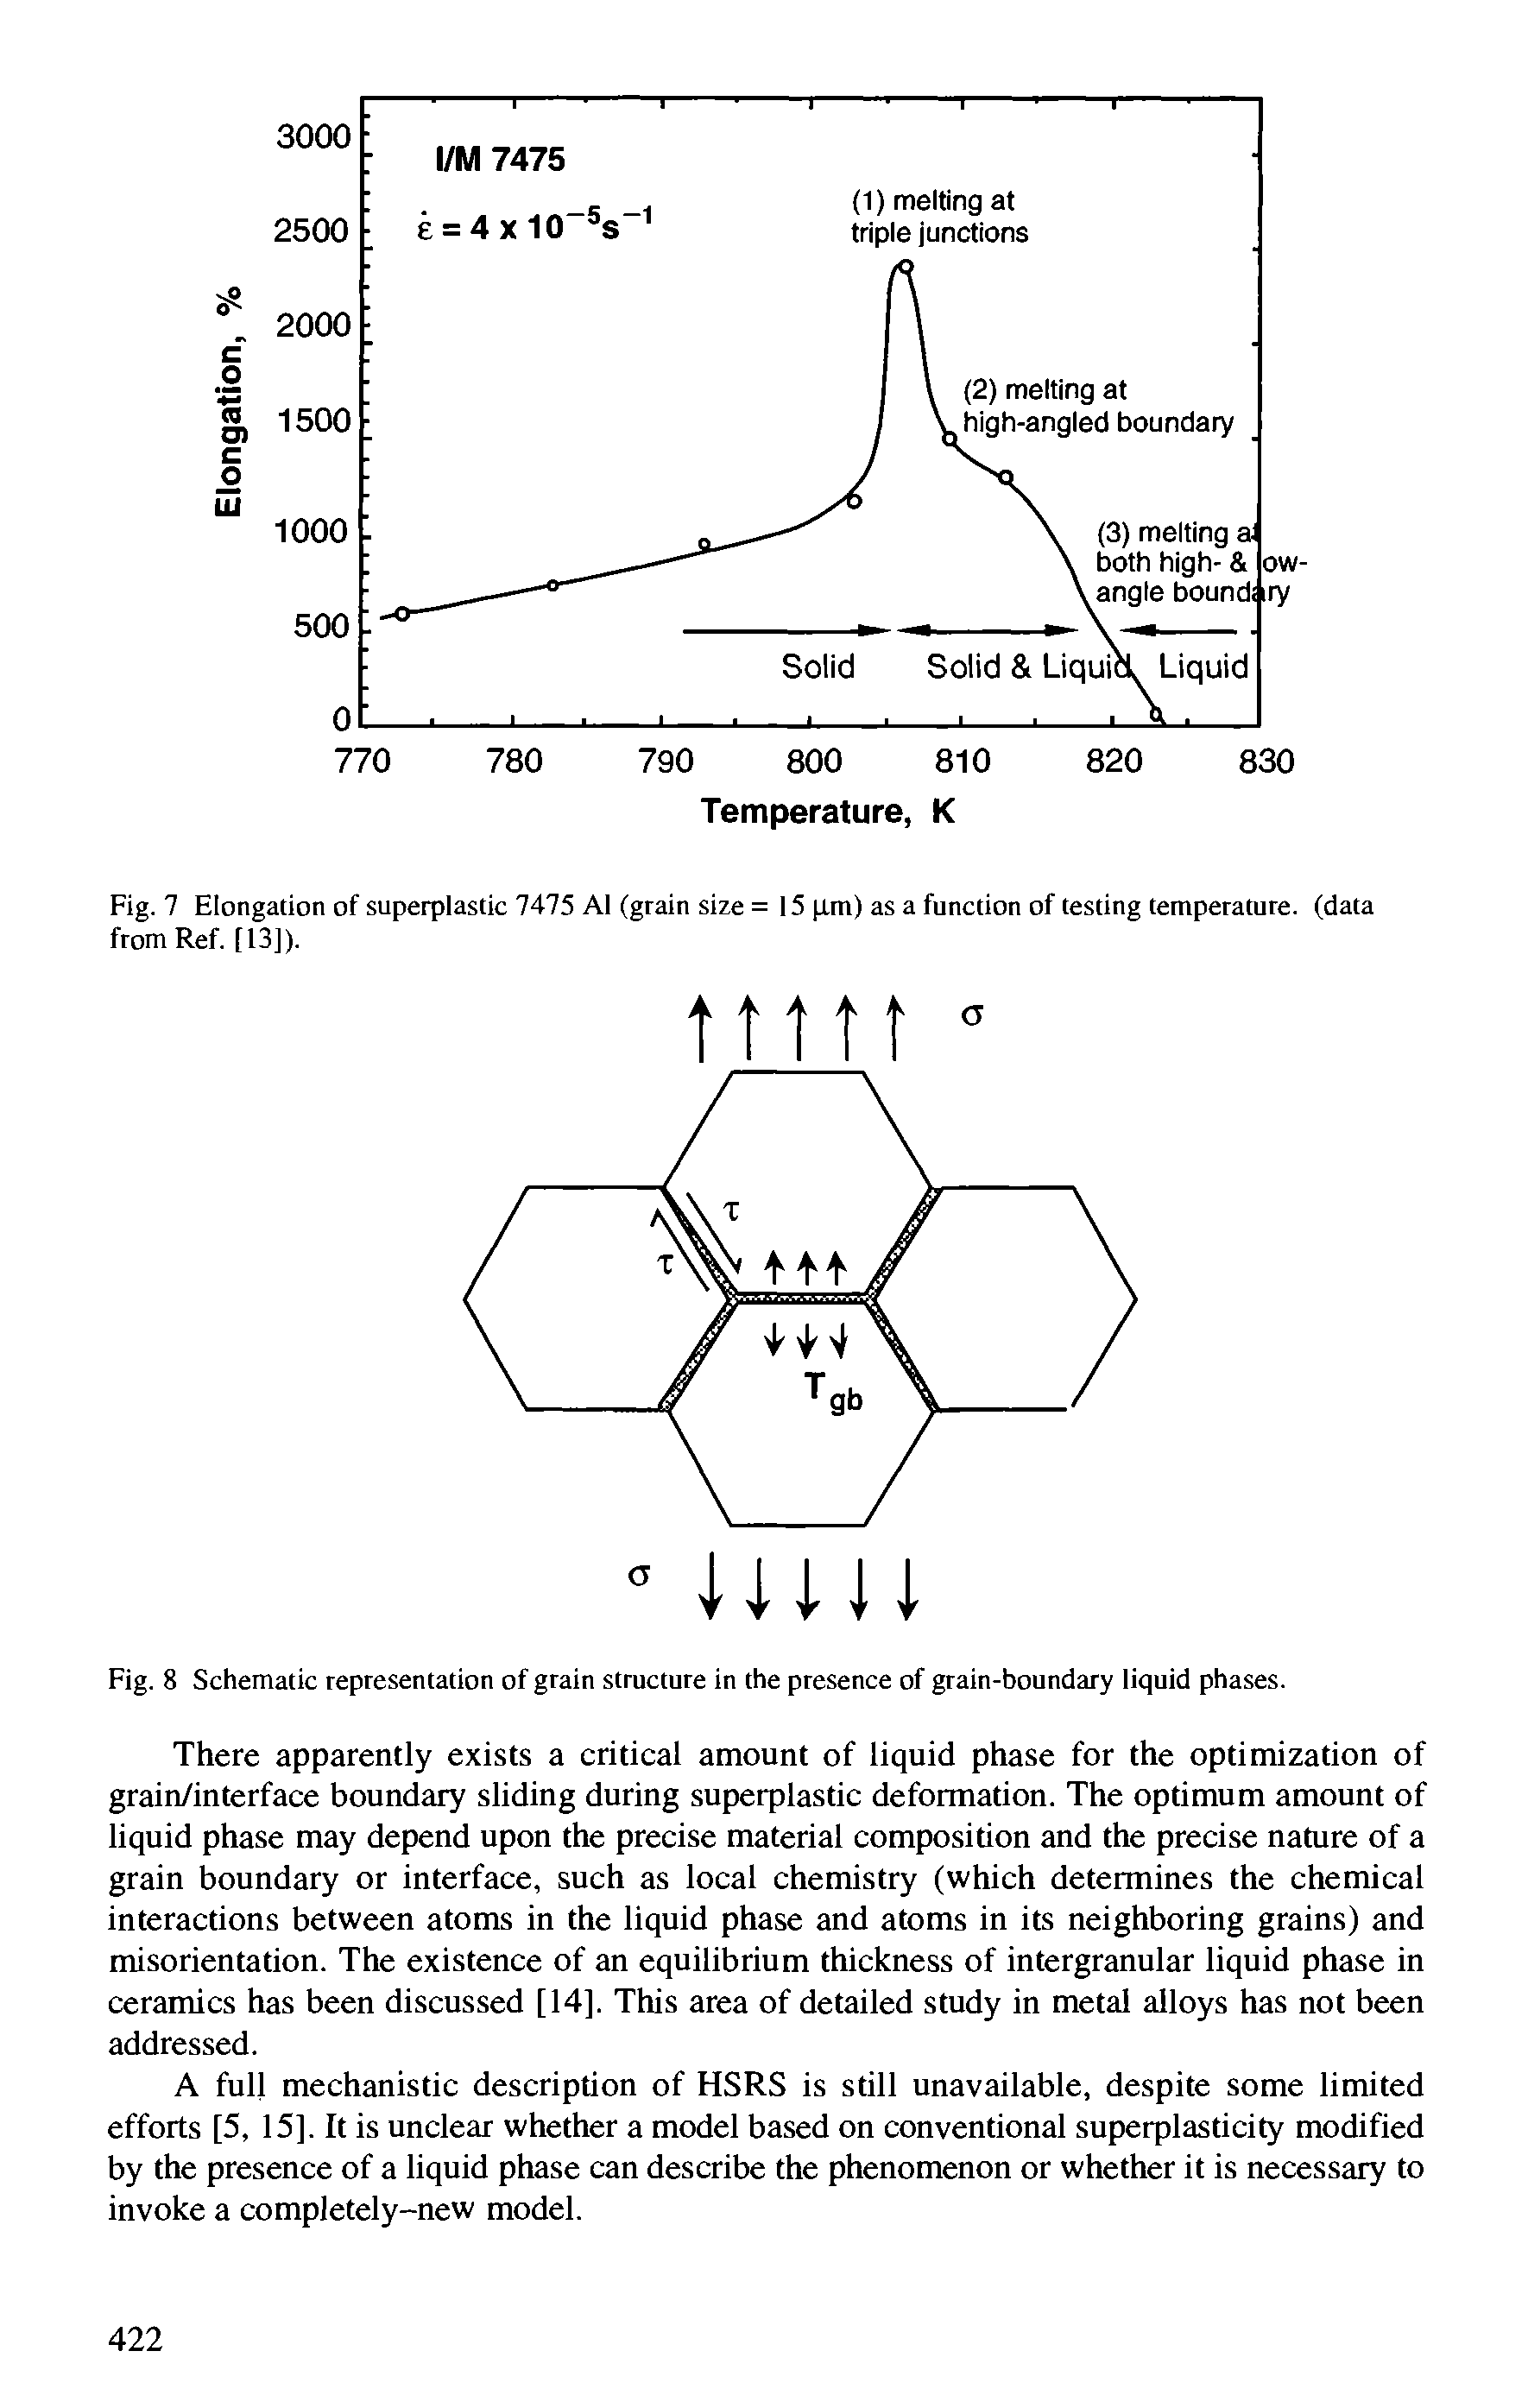 Fig. 8 Schematic representation of grain structure in the presence of grain-boundary liquid phases.